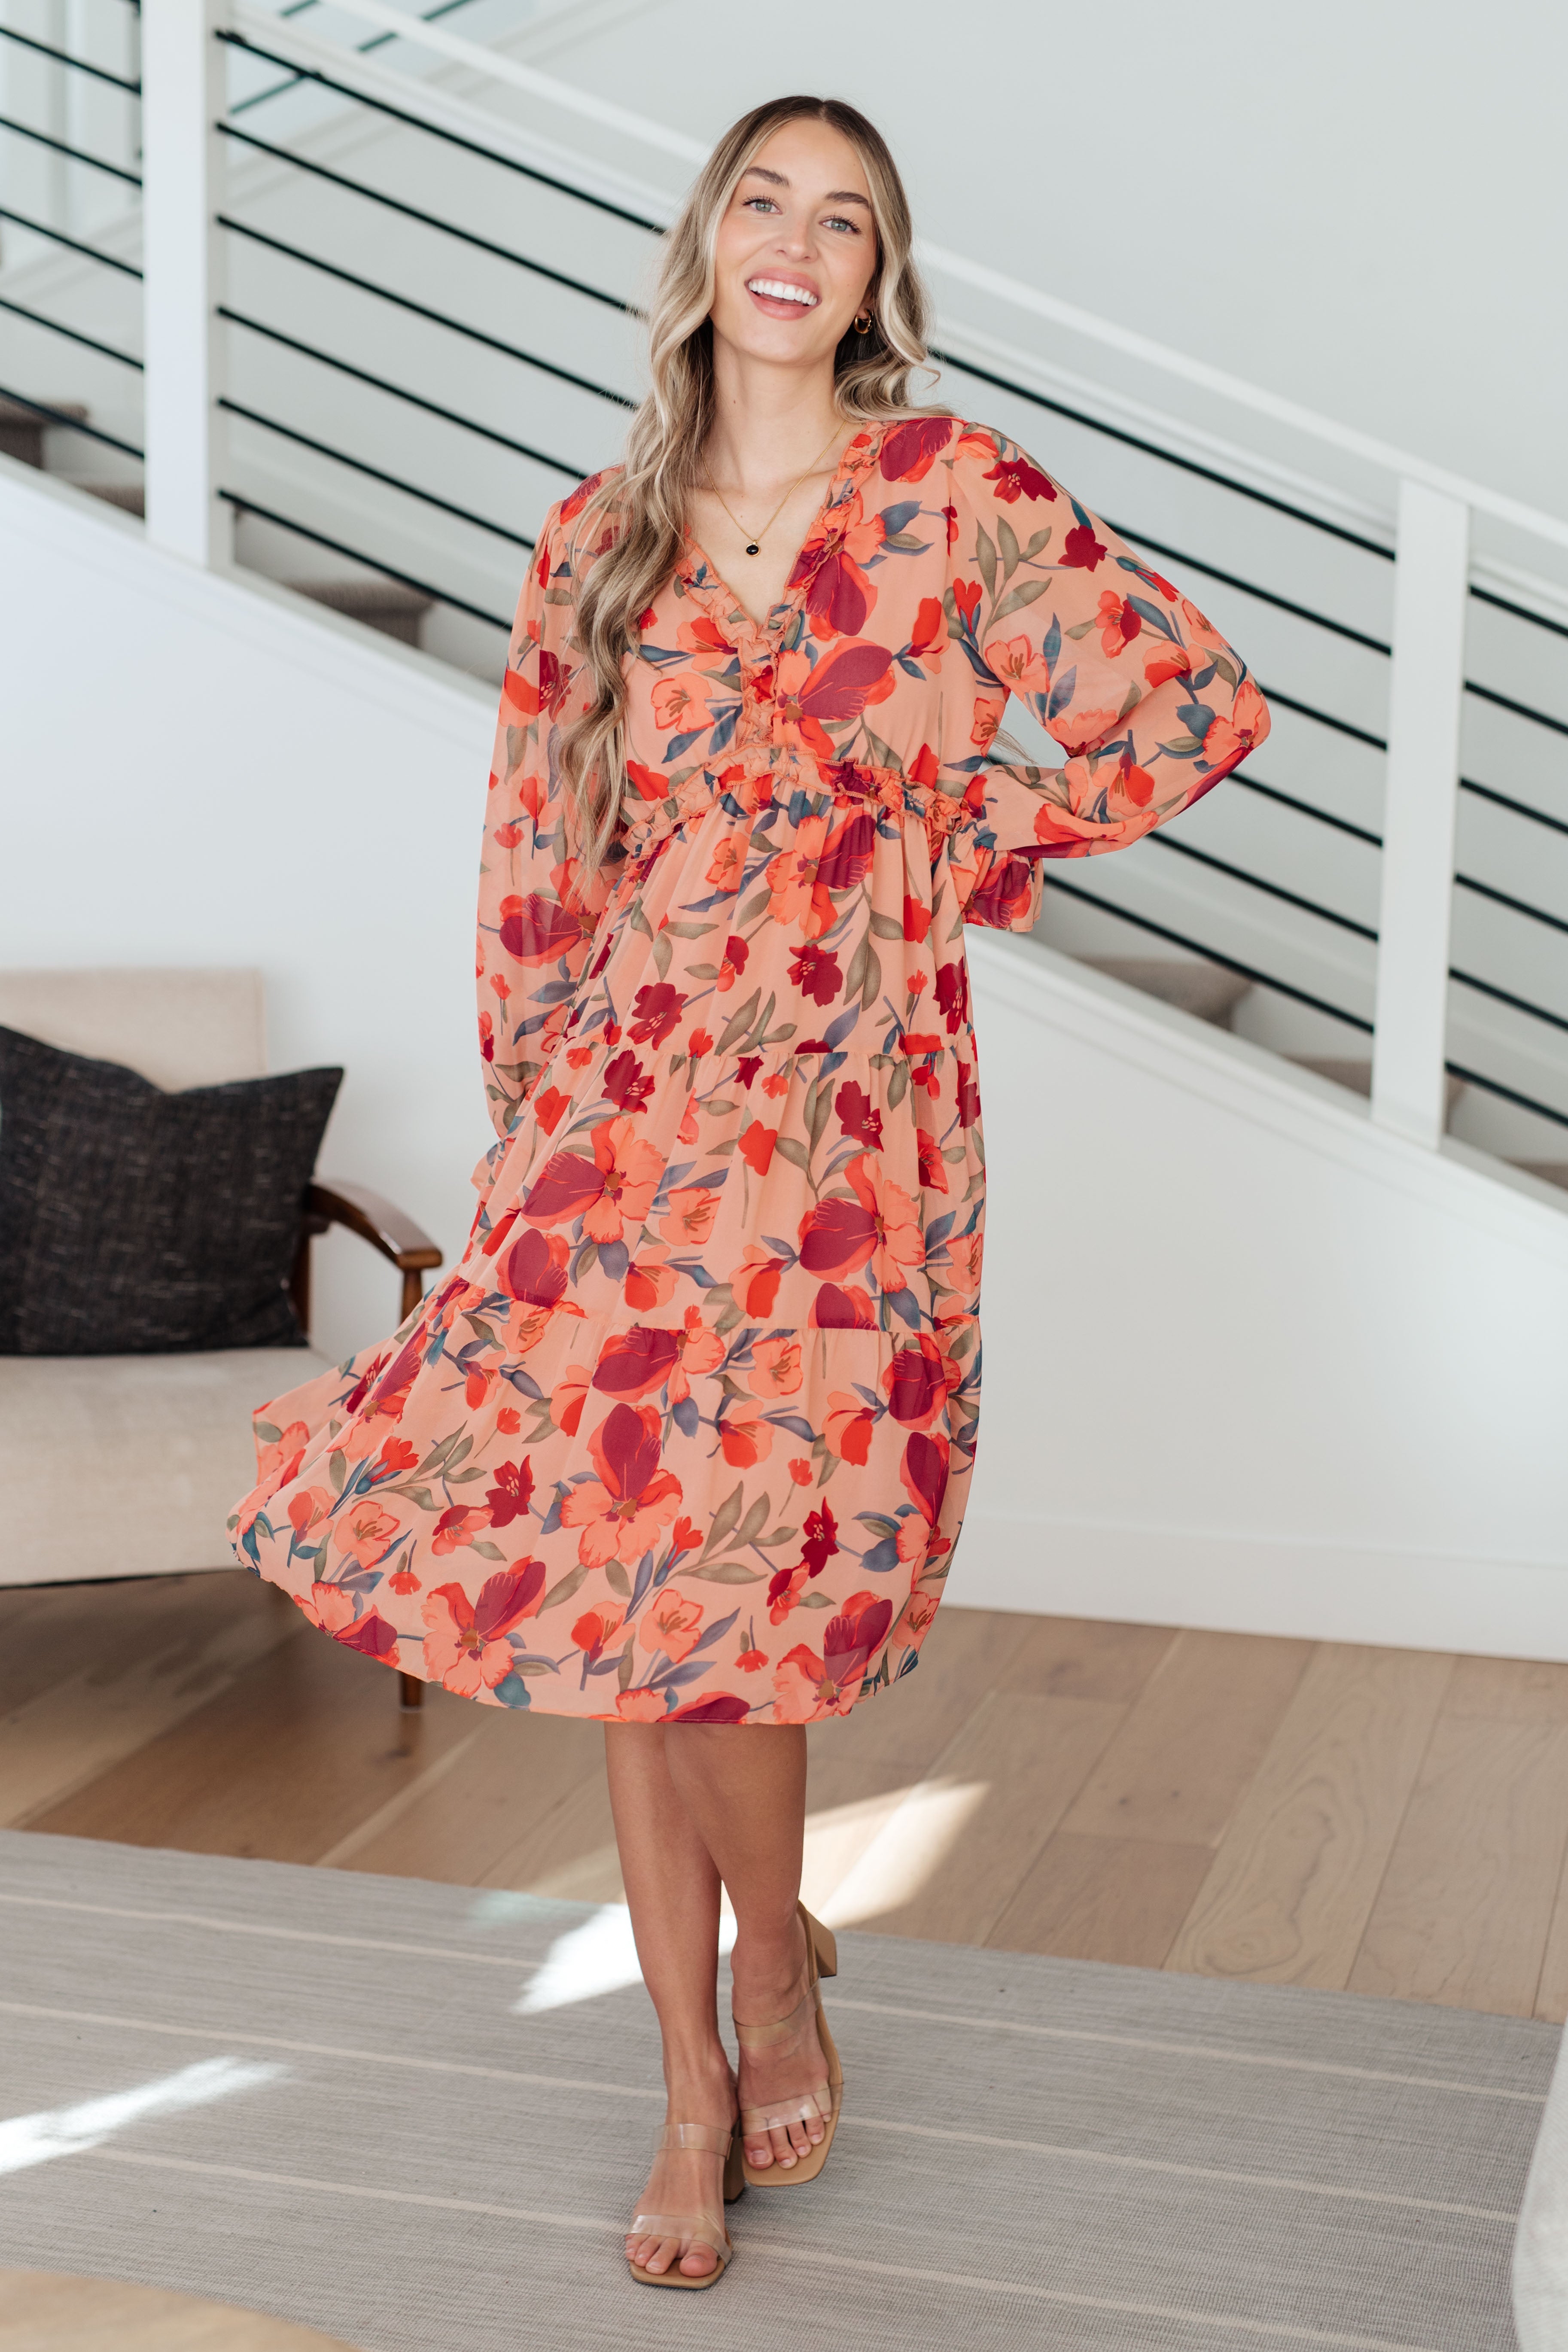 You And Me Floral Dress - Mulberry Skies